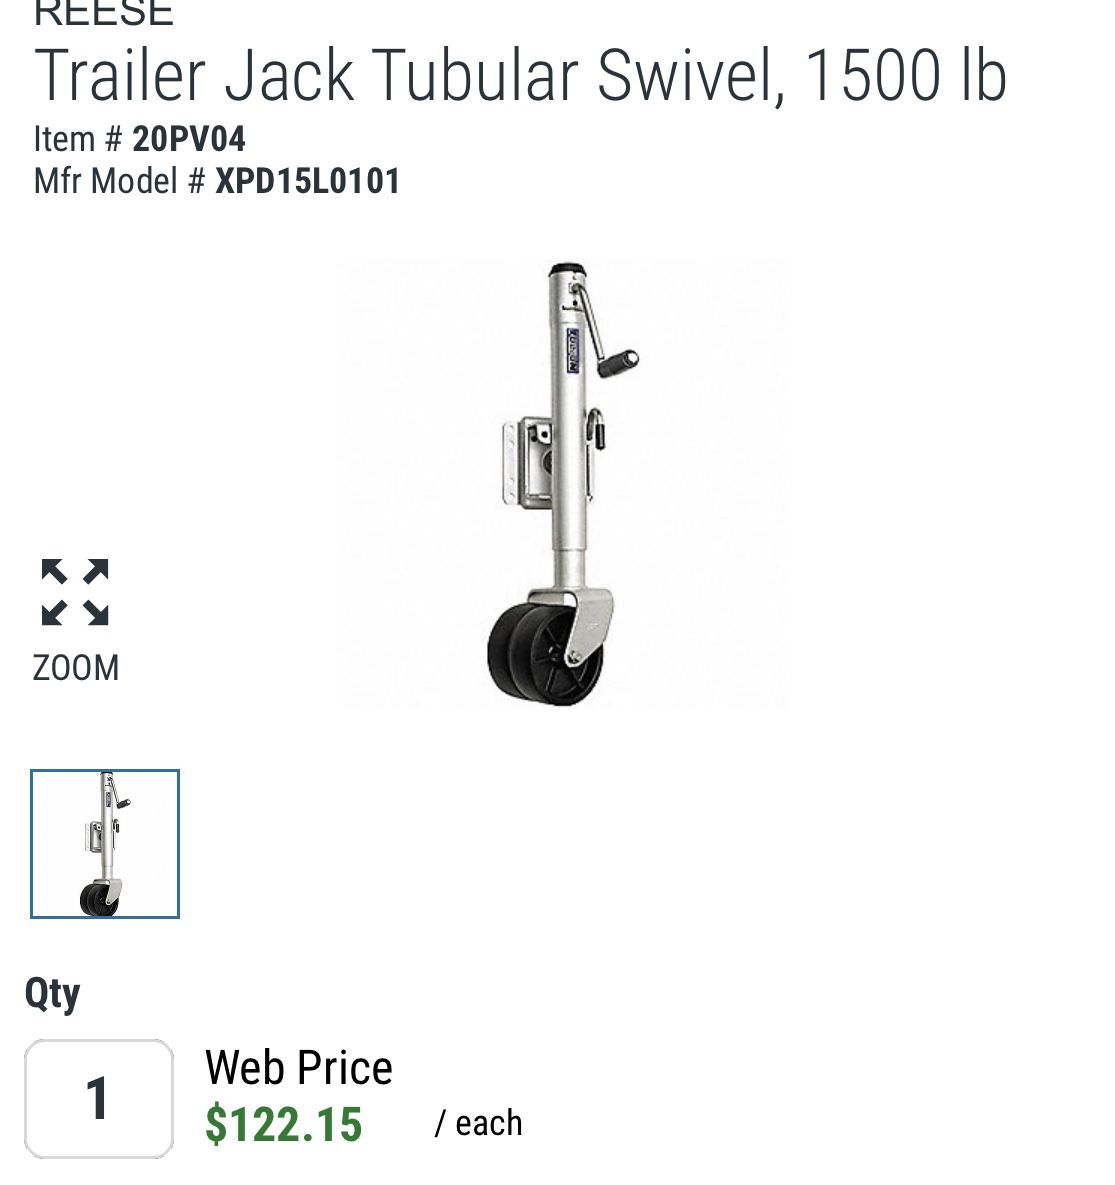 1500lb trailer jack (new in the box)